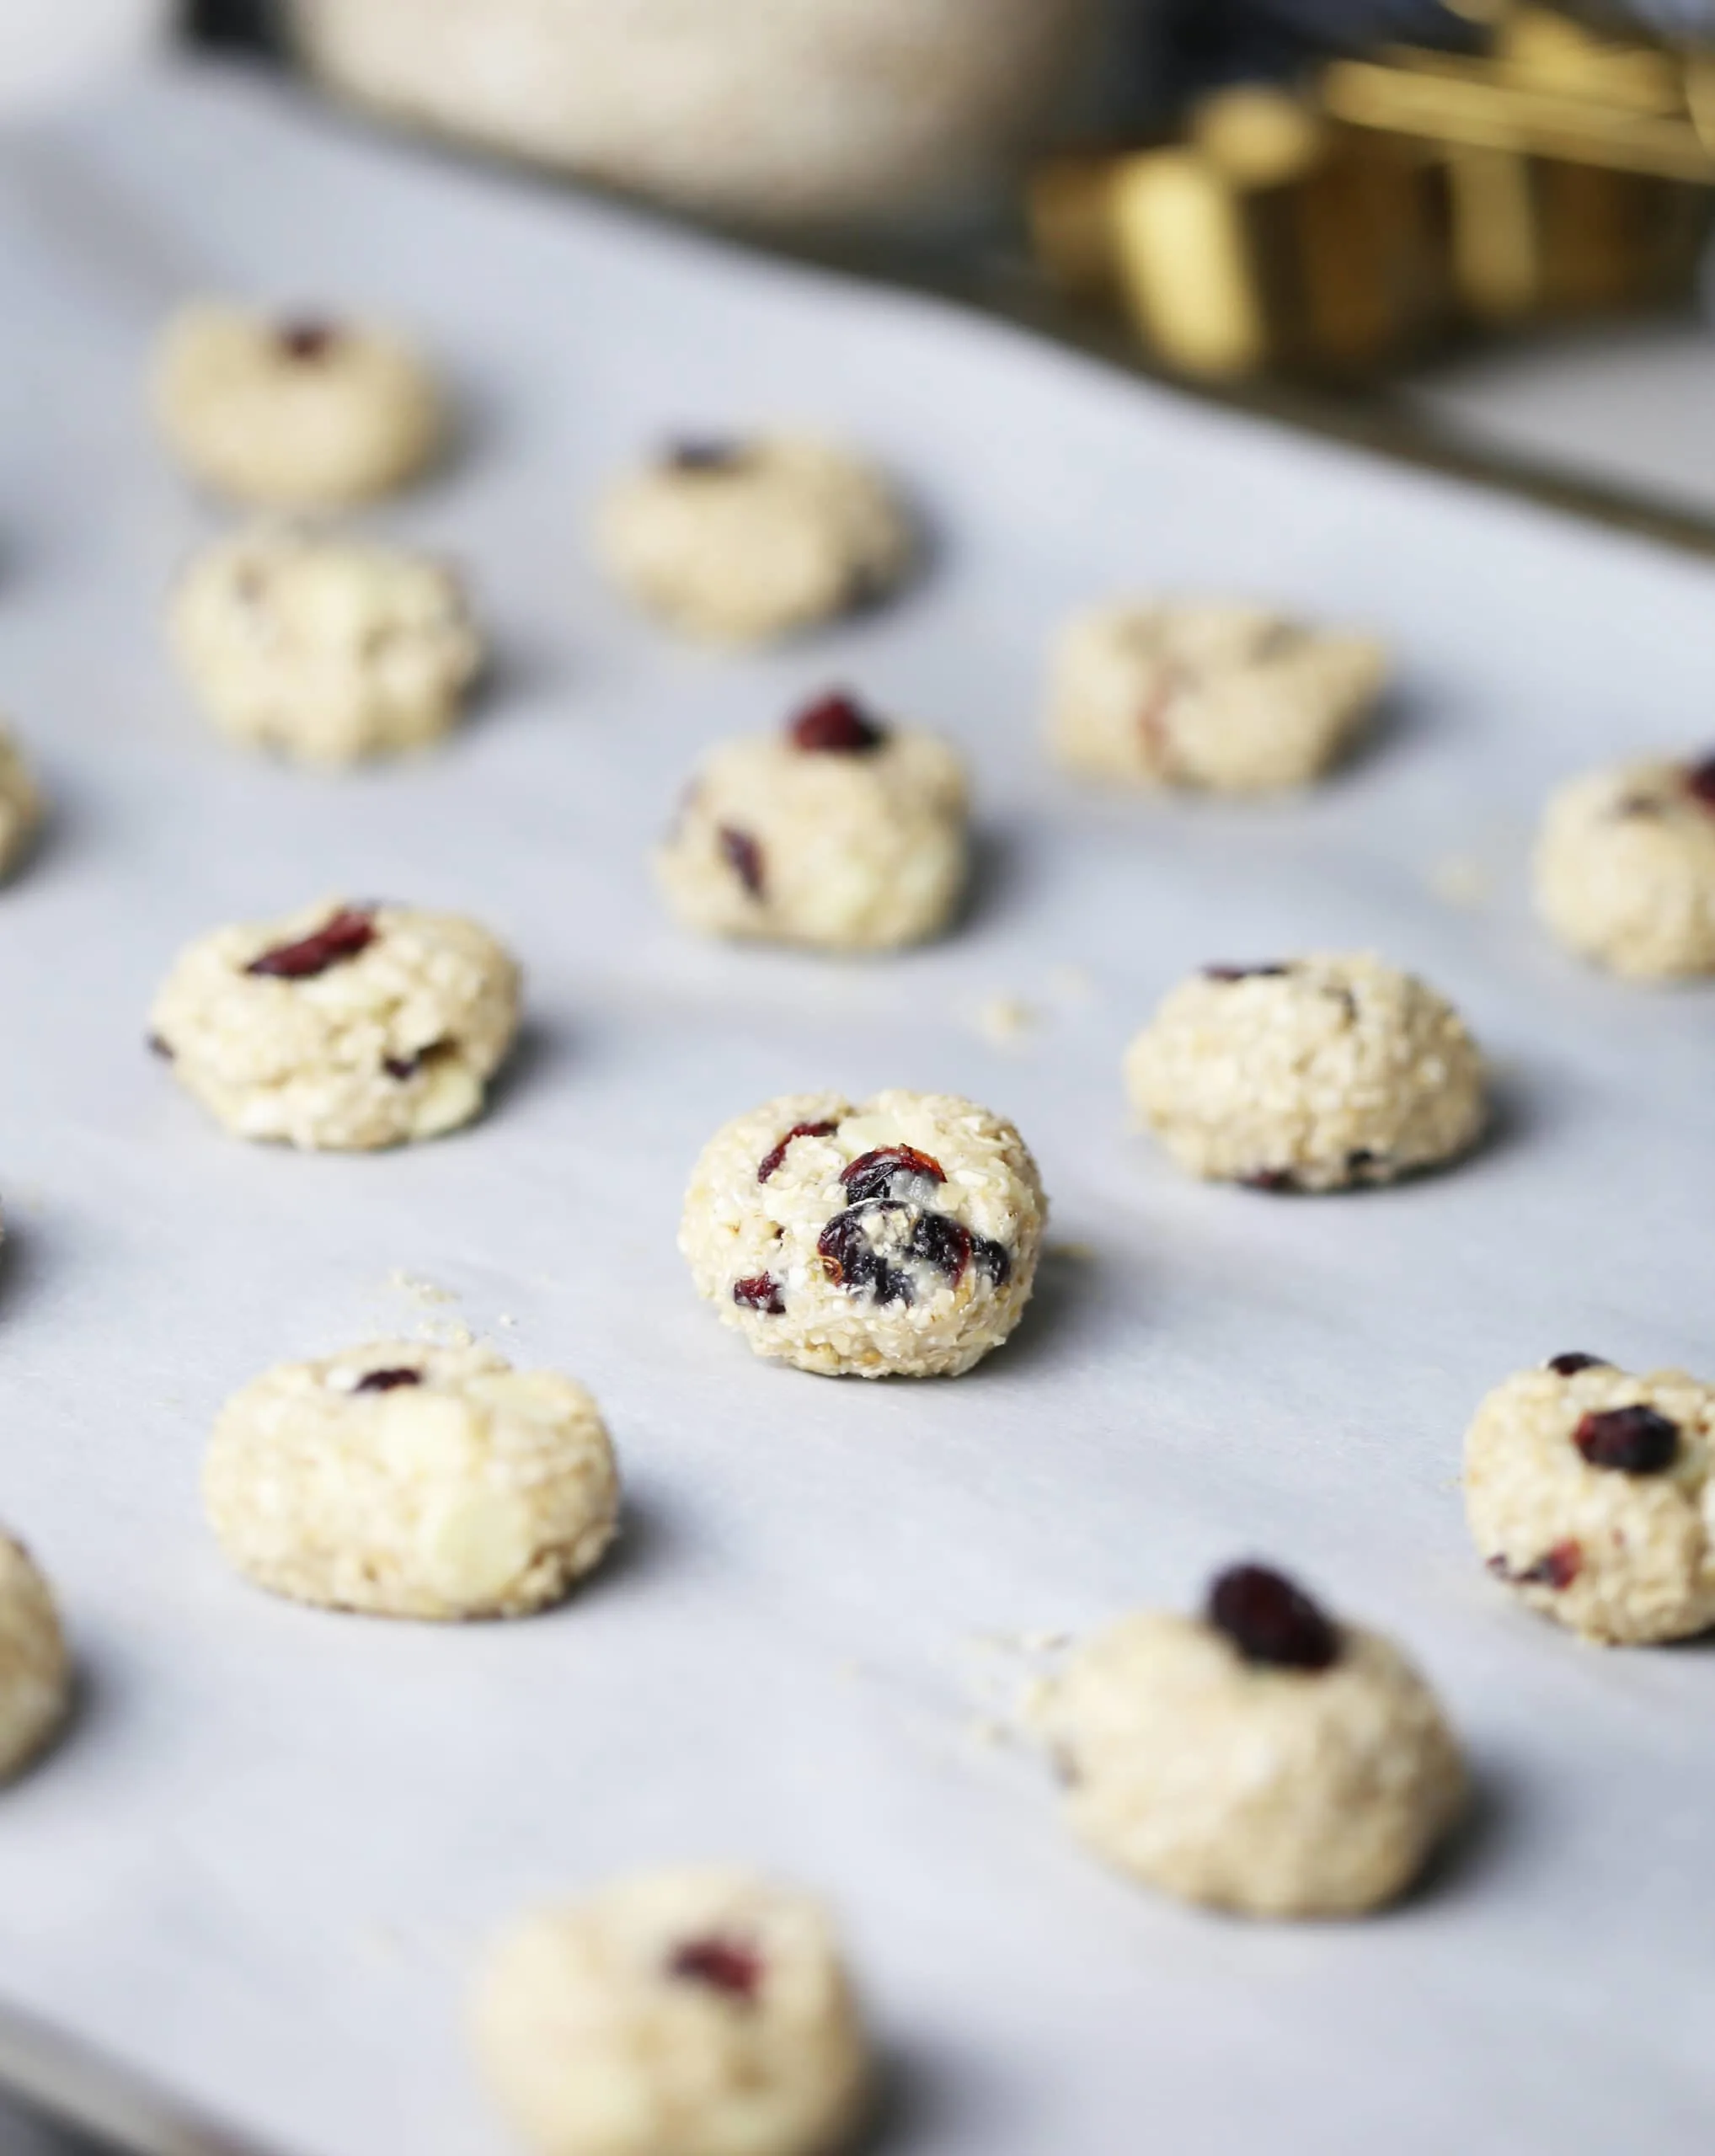 Tablespoon raw white chocolate cranberry oatmeal cookie dough placed on a parchment paper lined baking sheet.